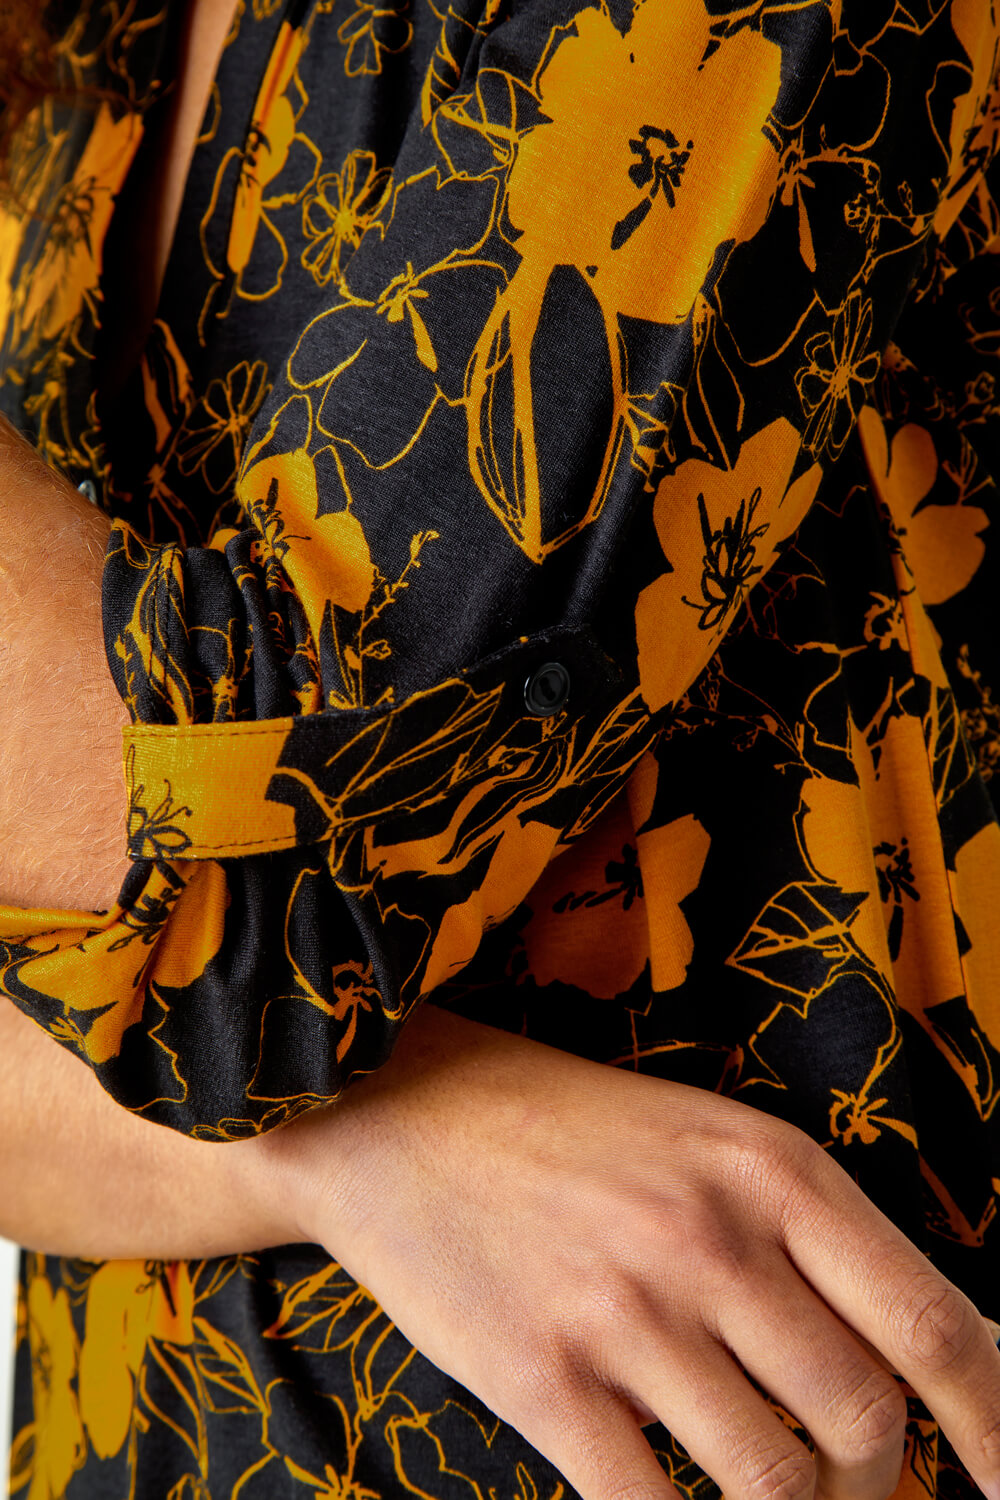 Ochre Floral Print Stretch Shirt, Image 5 of 5